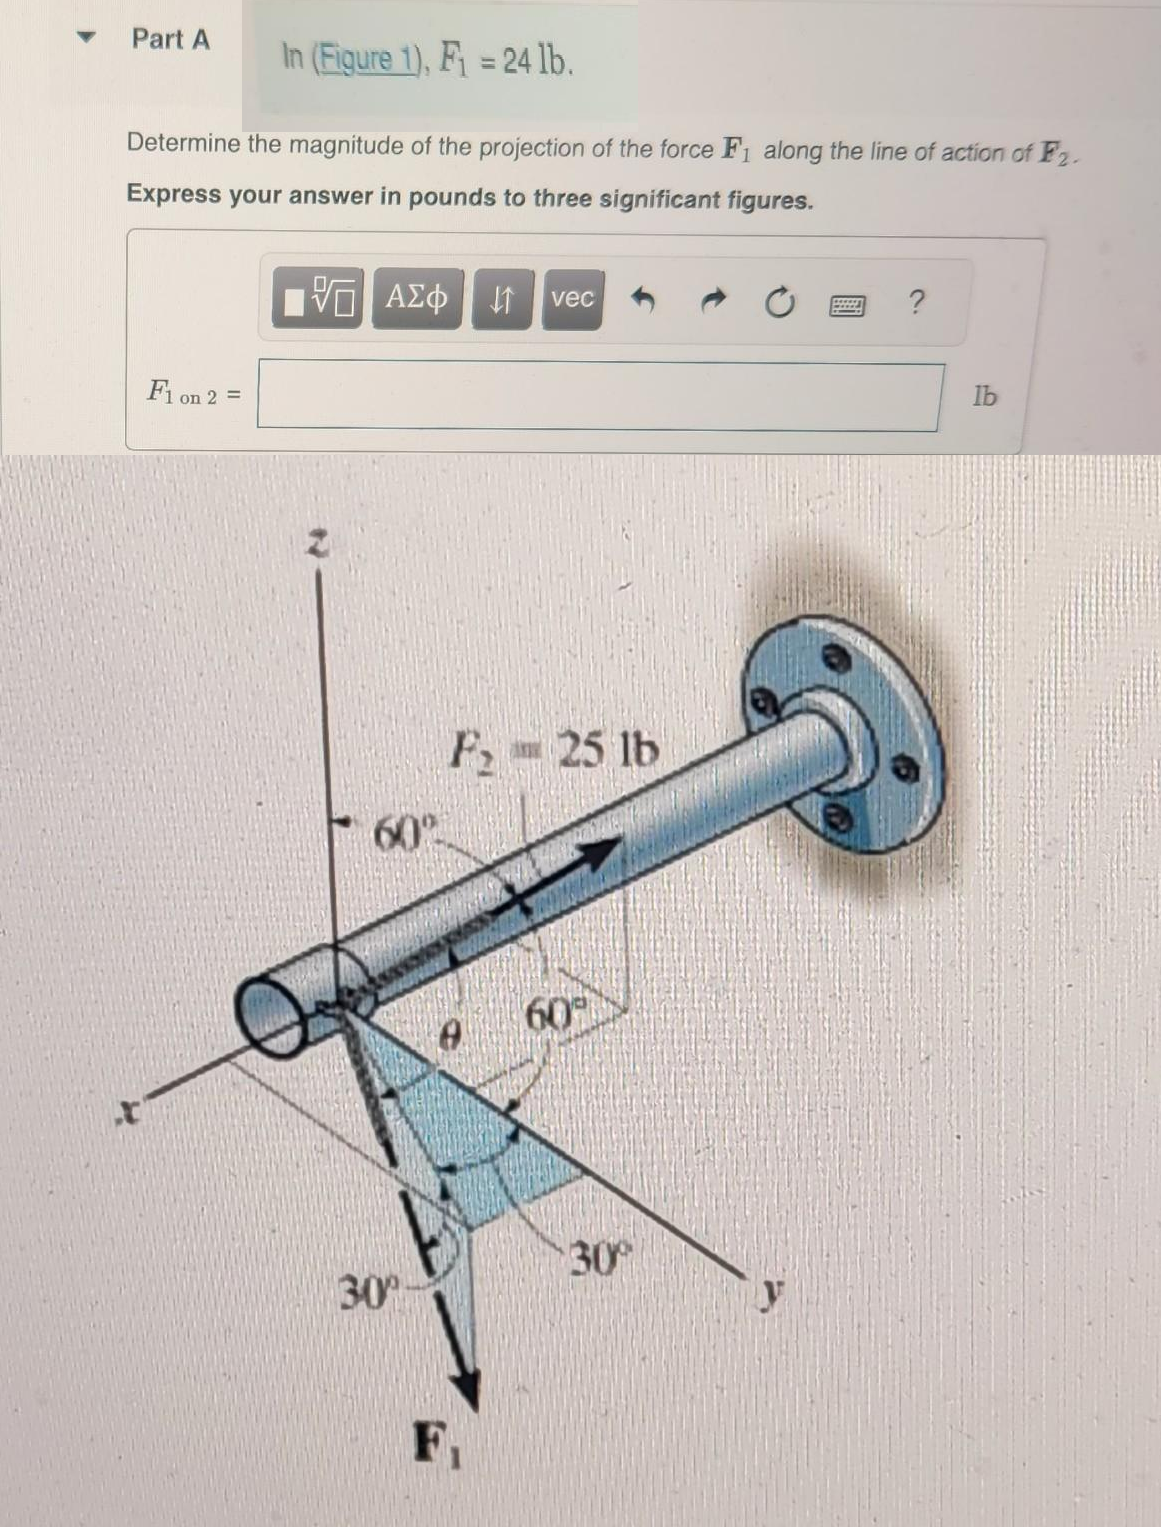 ▼
Part A
In (Figure 1), F₁ = 24 lb.
Determine the magnitude of the projection of the force F₁ along the line of action of F₂.
Express your answer in pounds to three significant figures.
IVE ΑΣΦ
F1 on 2 =
60°-
30%
vec
F, 25 lb
FAKKY
60
30°
?
lb